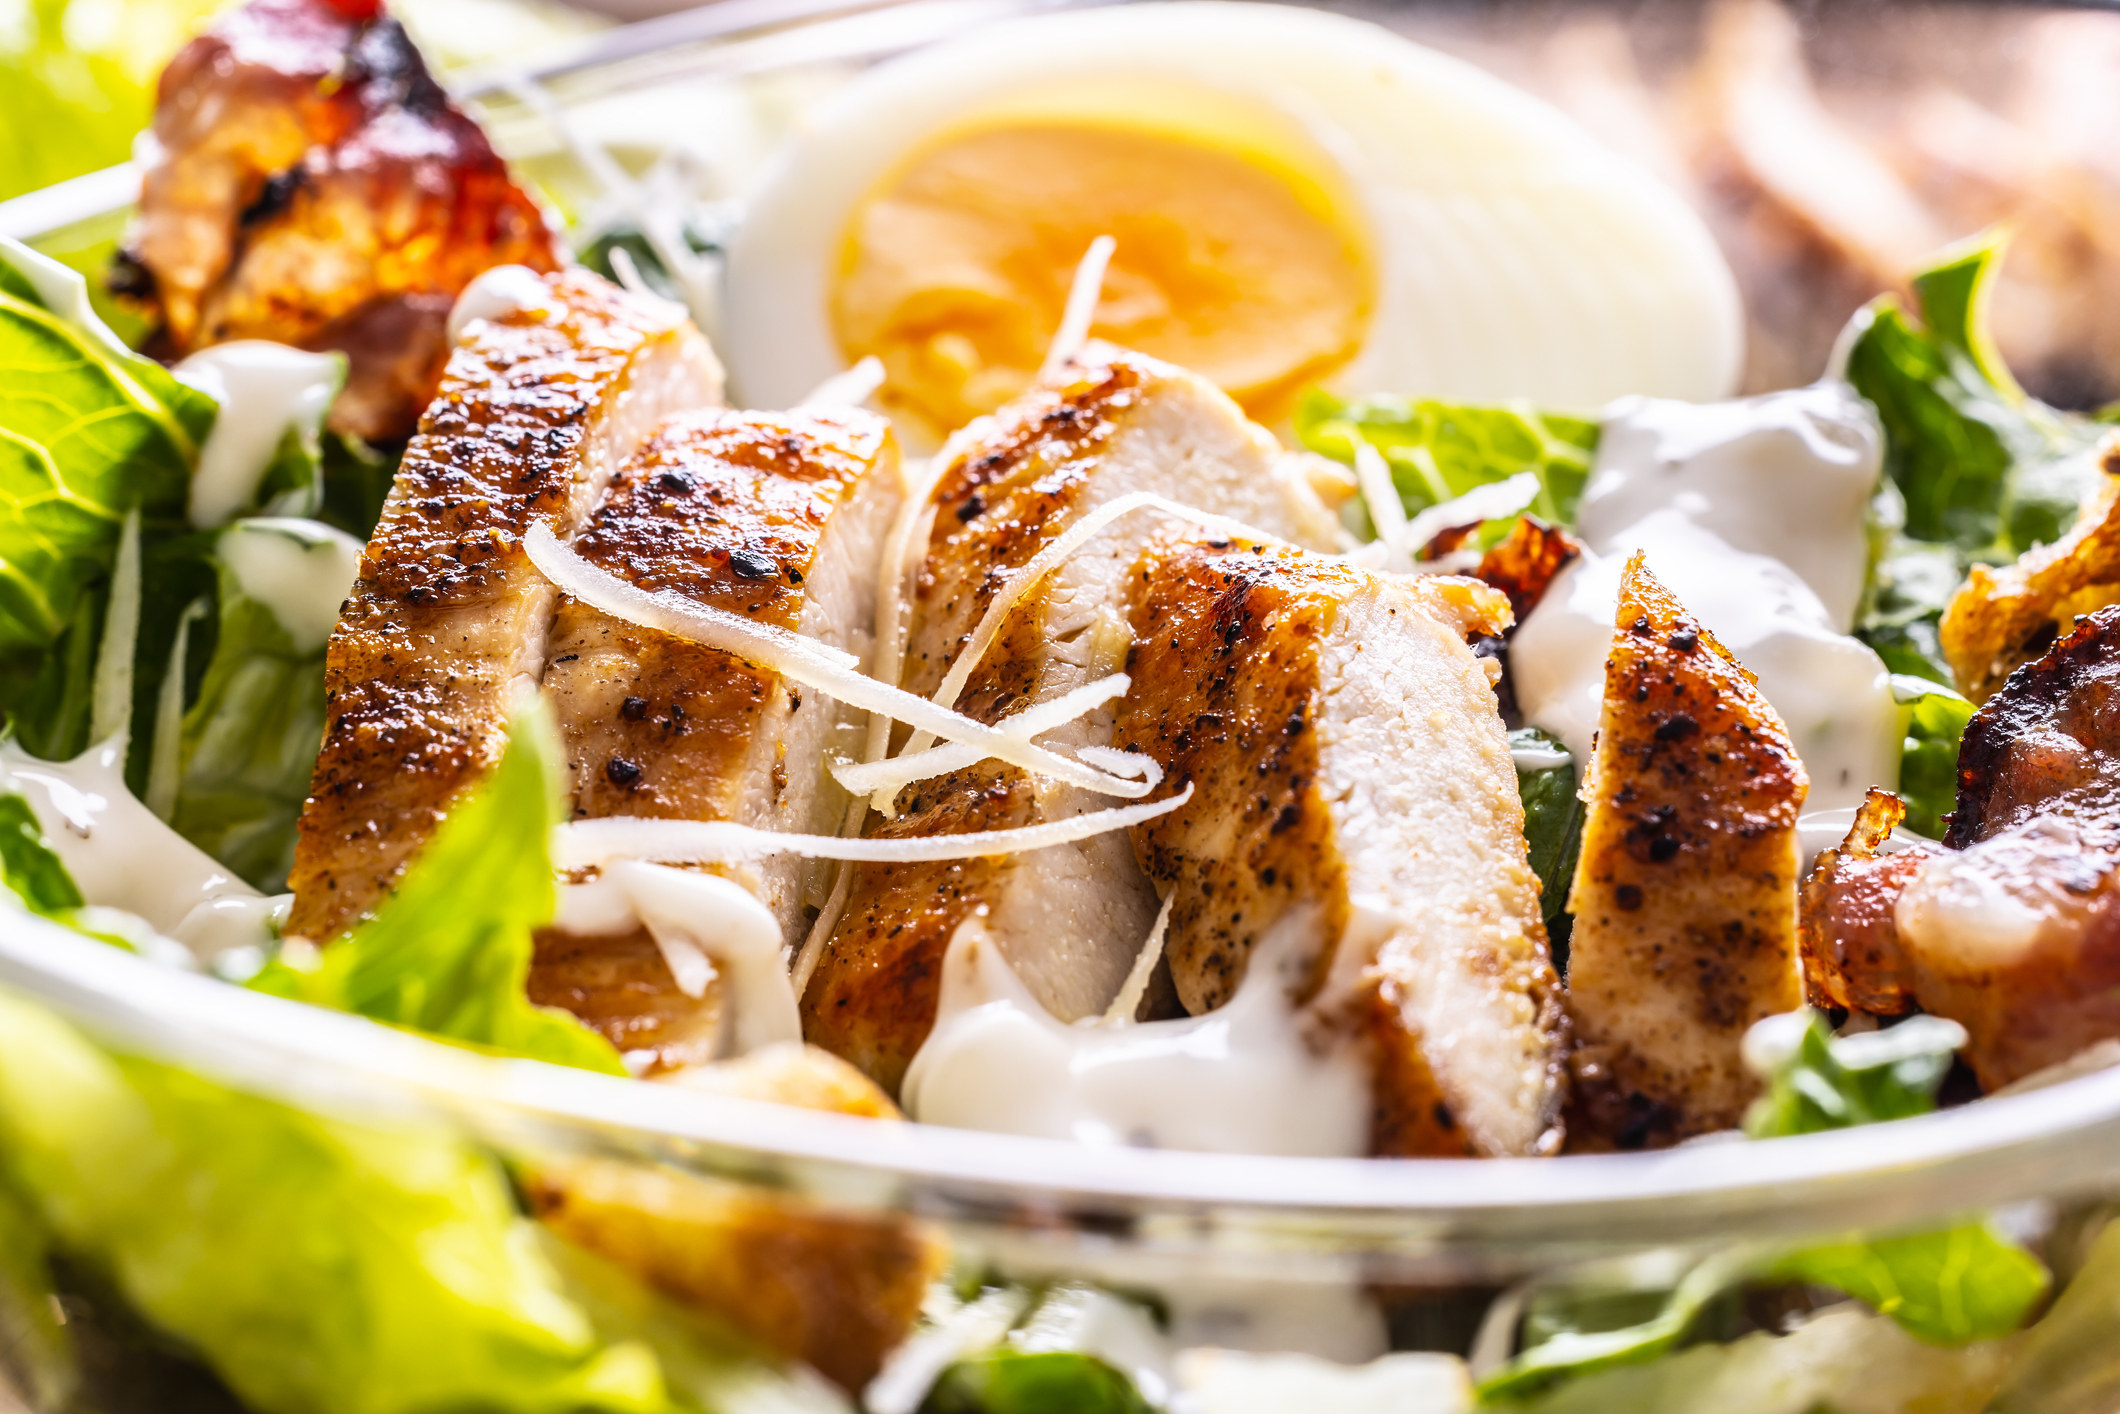 Caesar salad with grilled chicken slices in a glass bowl.